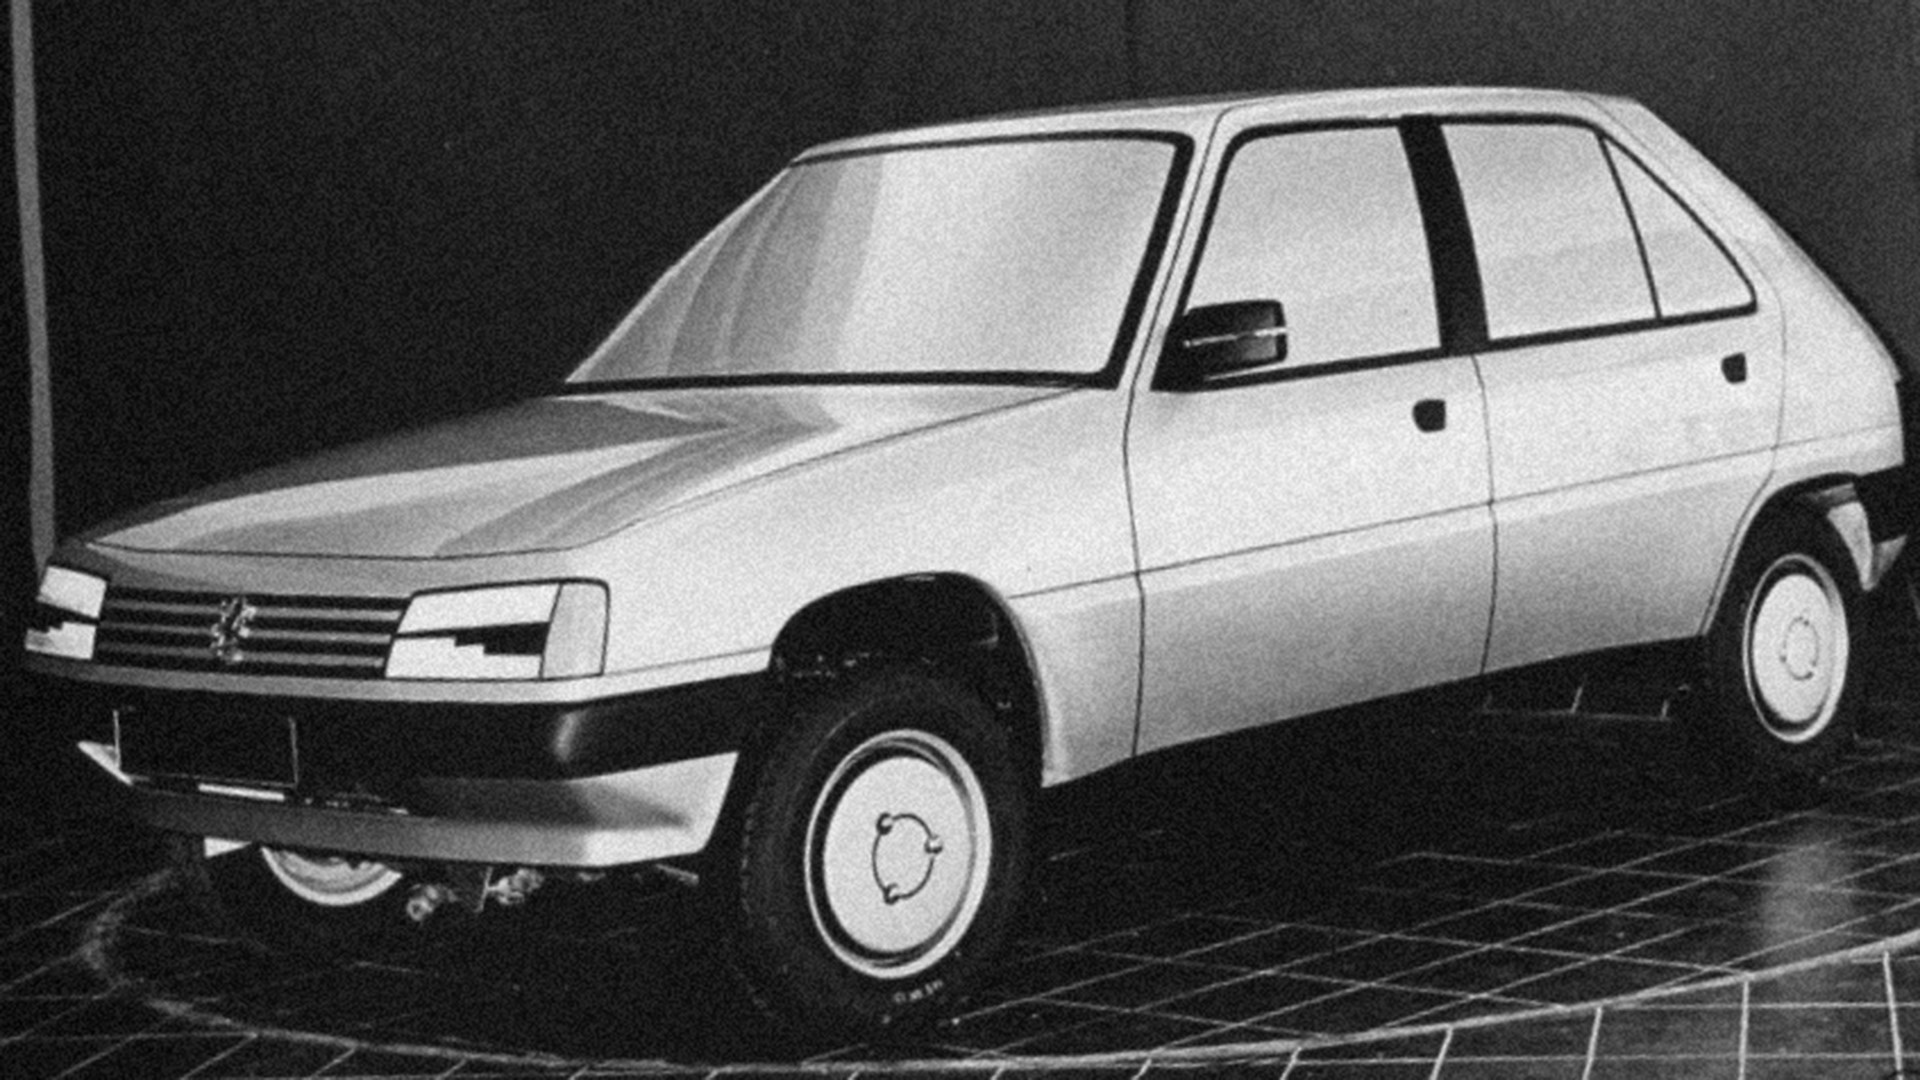 Peugeot 205 at 40: celebrating an icon